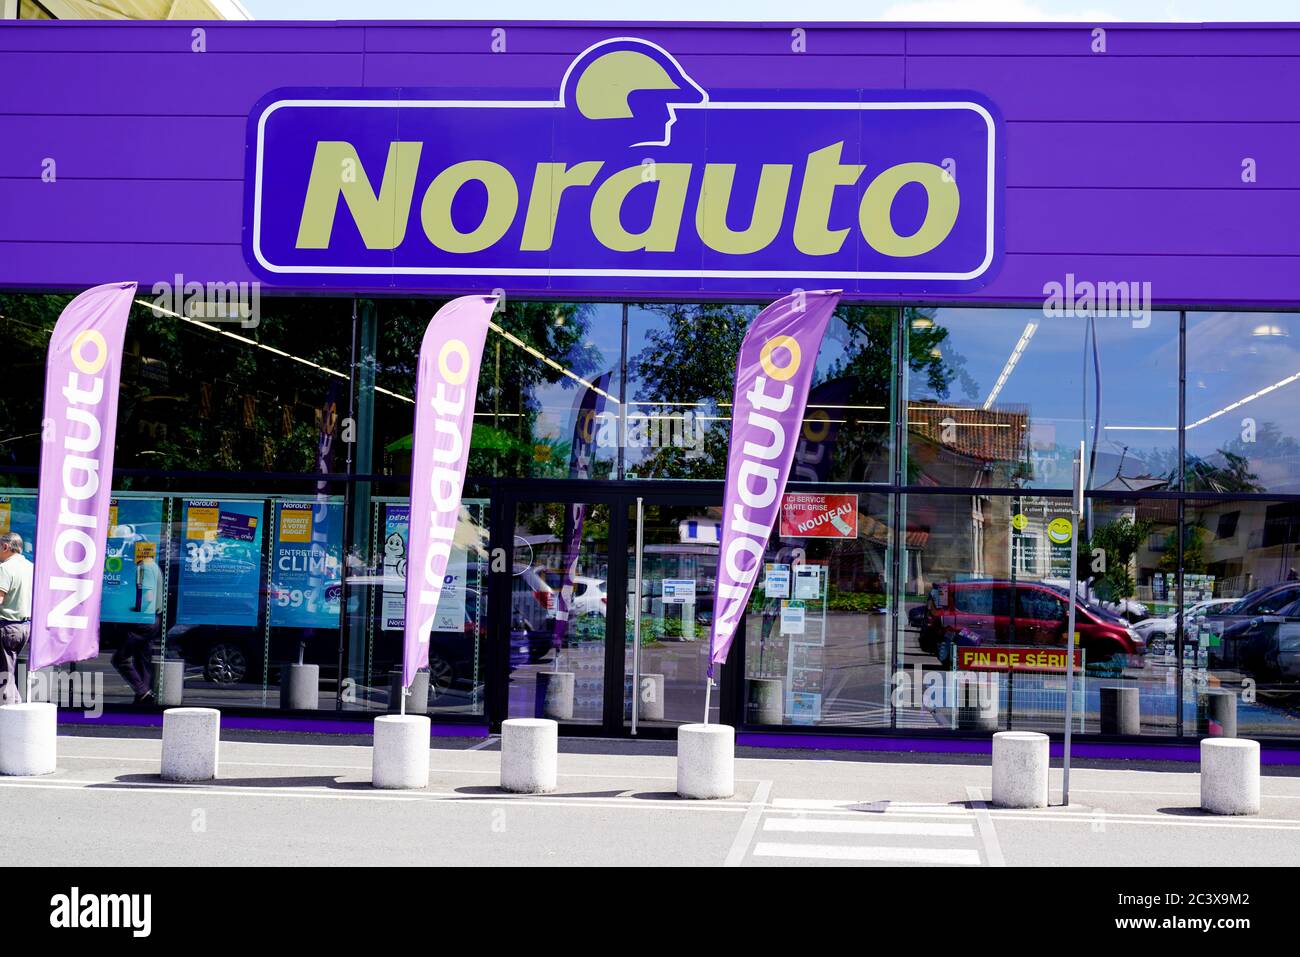 Bordeaux , Aquitaine / France - 06 20 2020 : Norauto car station garage and shop french store for Automotive Repair and Spare Parts Stock Photo